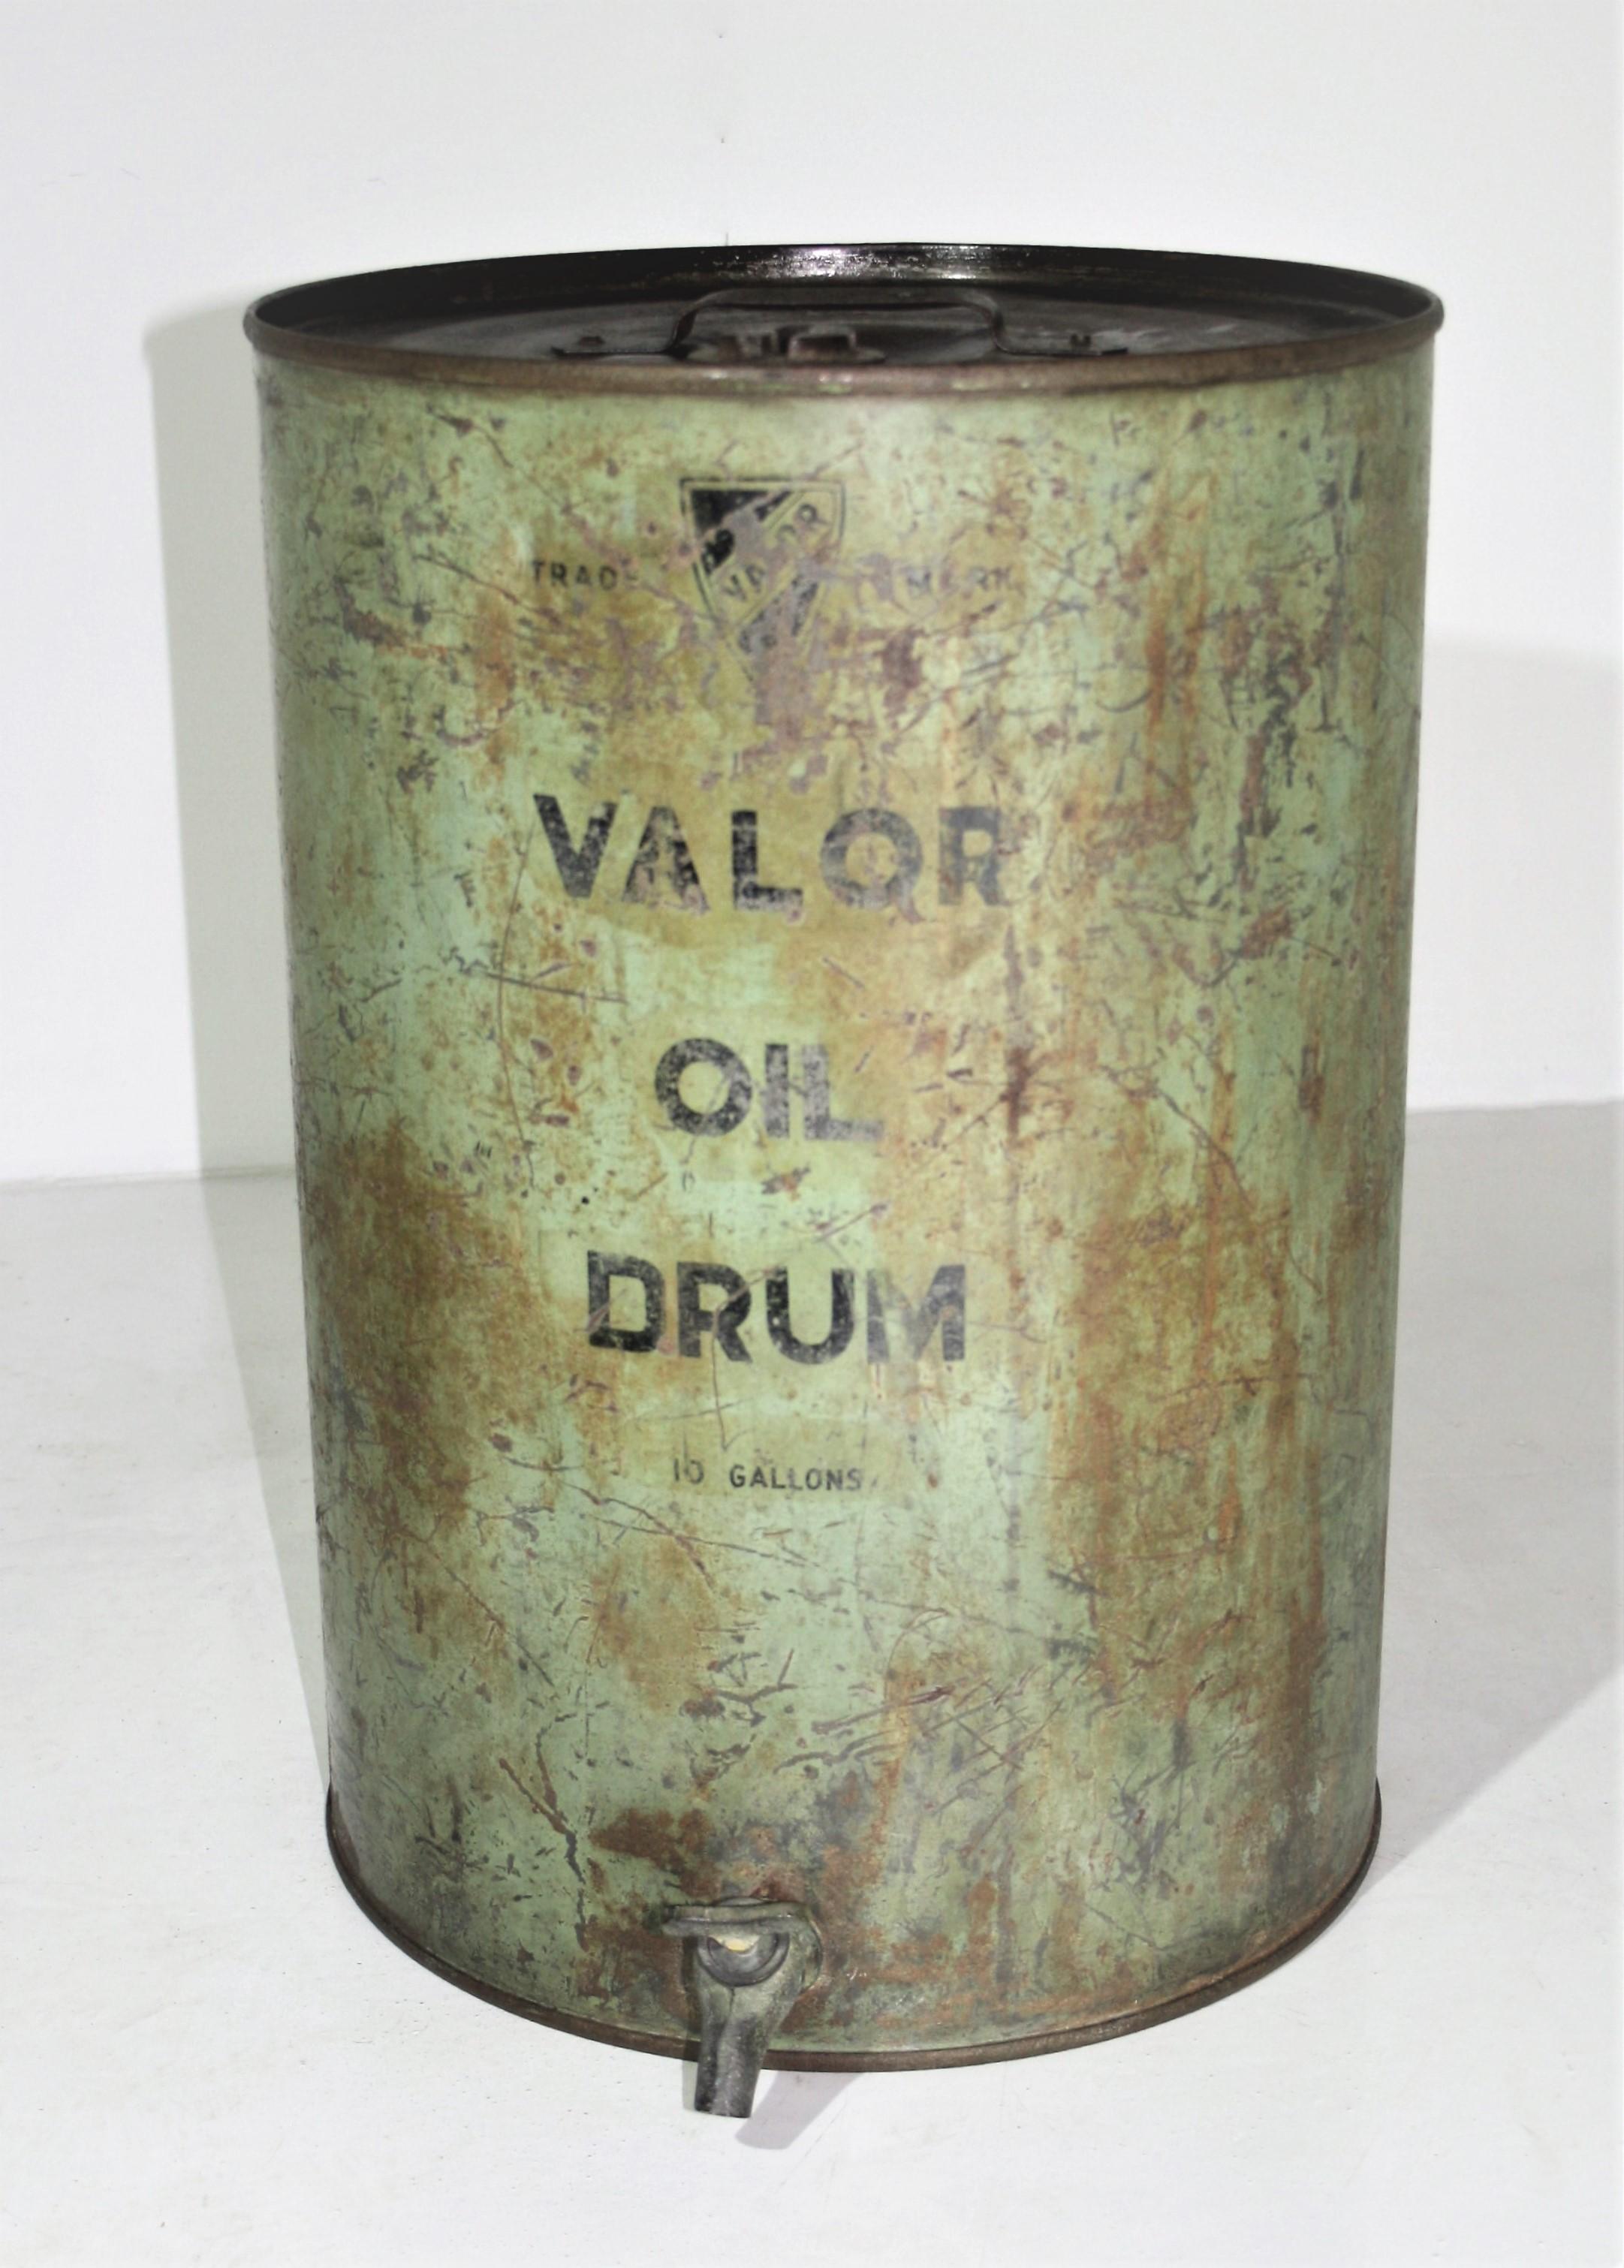 A large 10 Gallon Drum with brass tap.
Wonderful colour and patina.
Founded in 1890 in Birmingham, England, Valor became a market leader in manufacturing container storage equipment, during WWII Valor played its part in the War Effort, extending